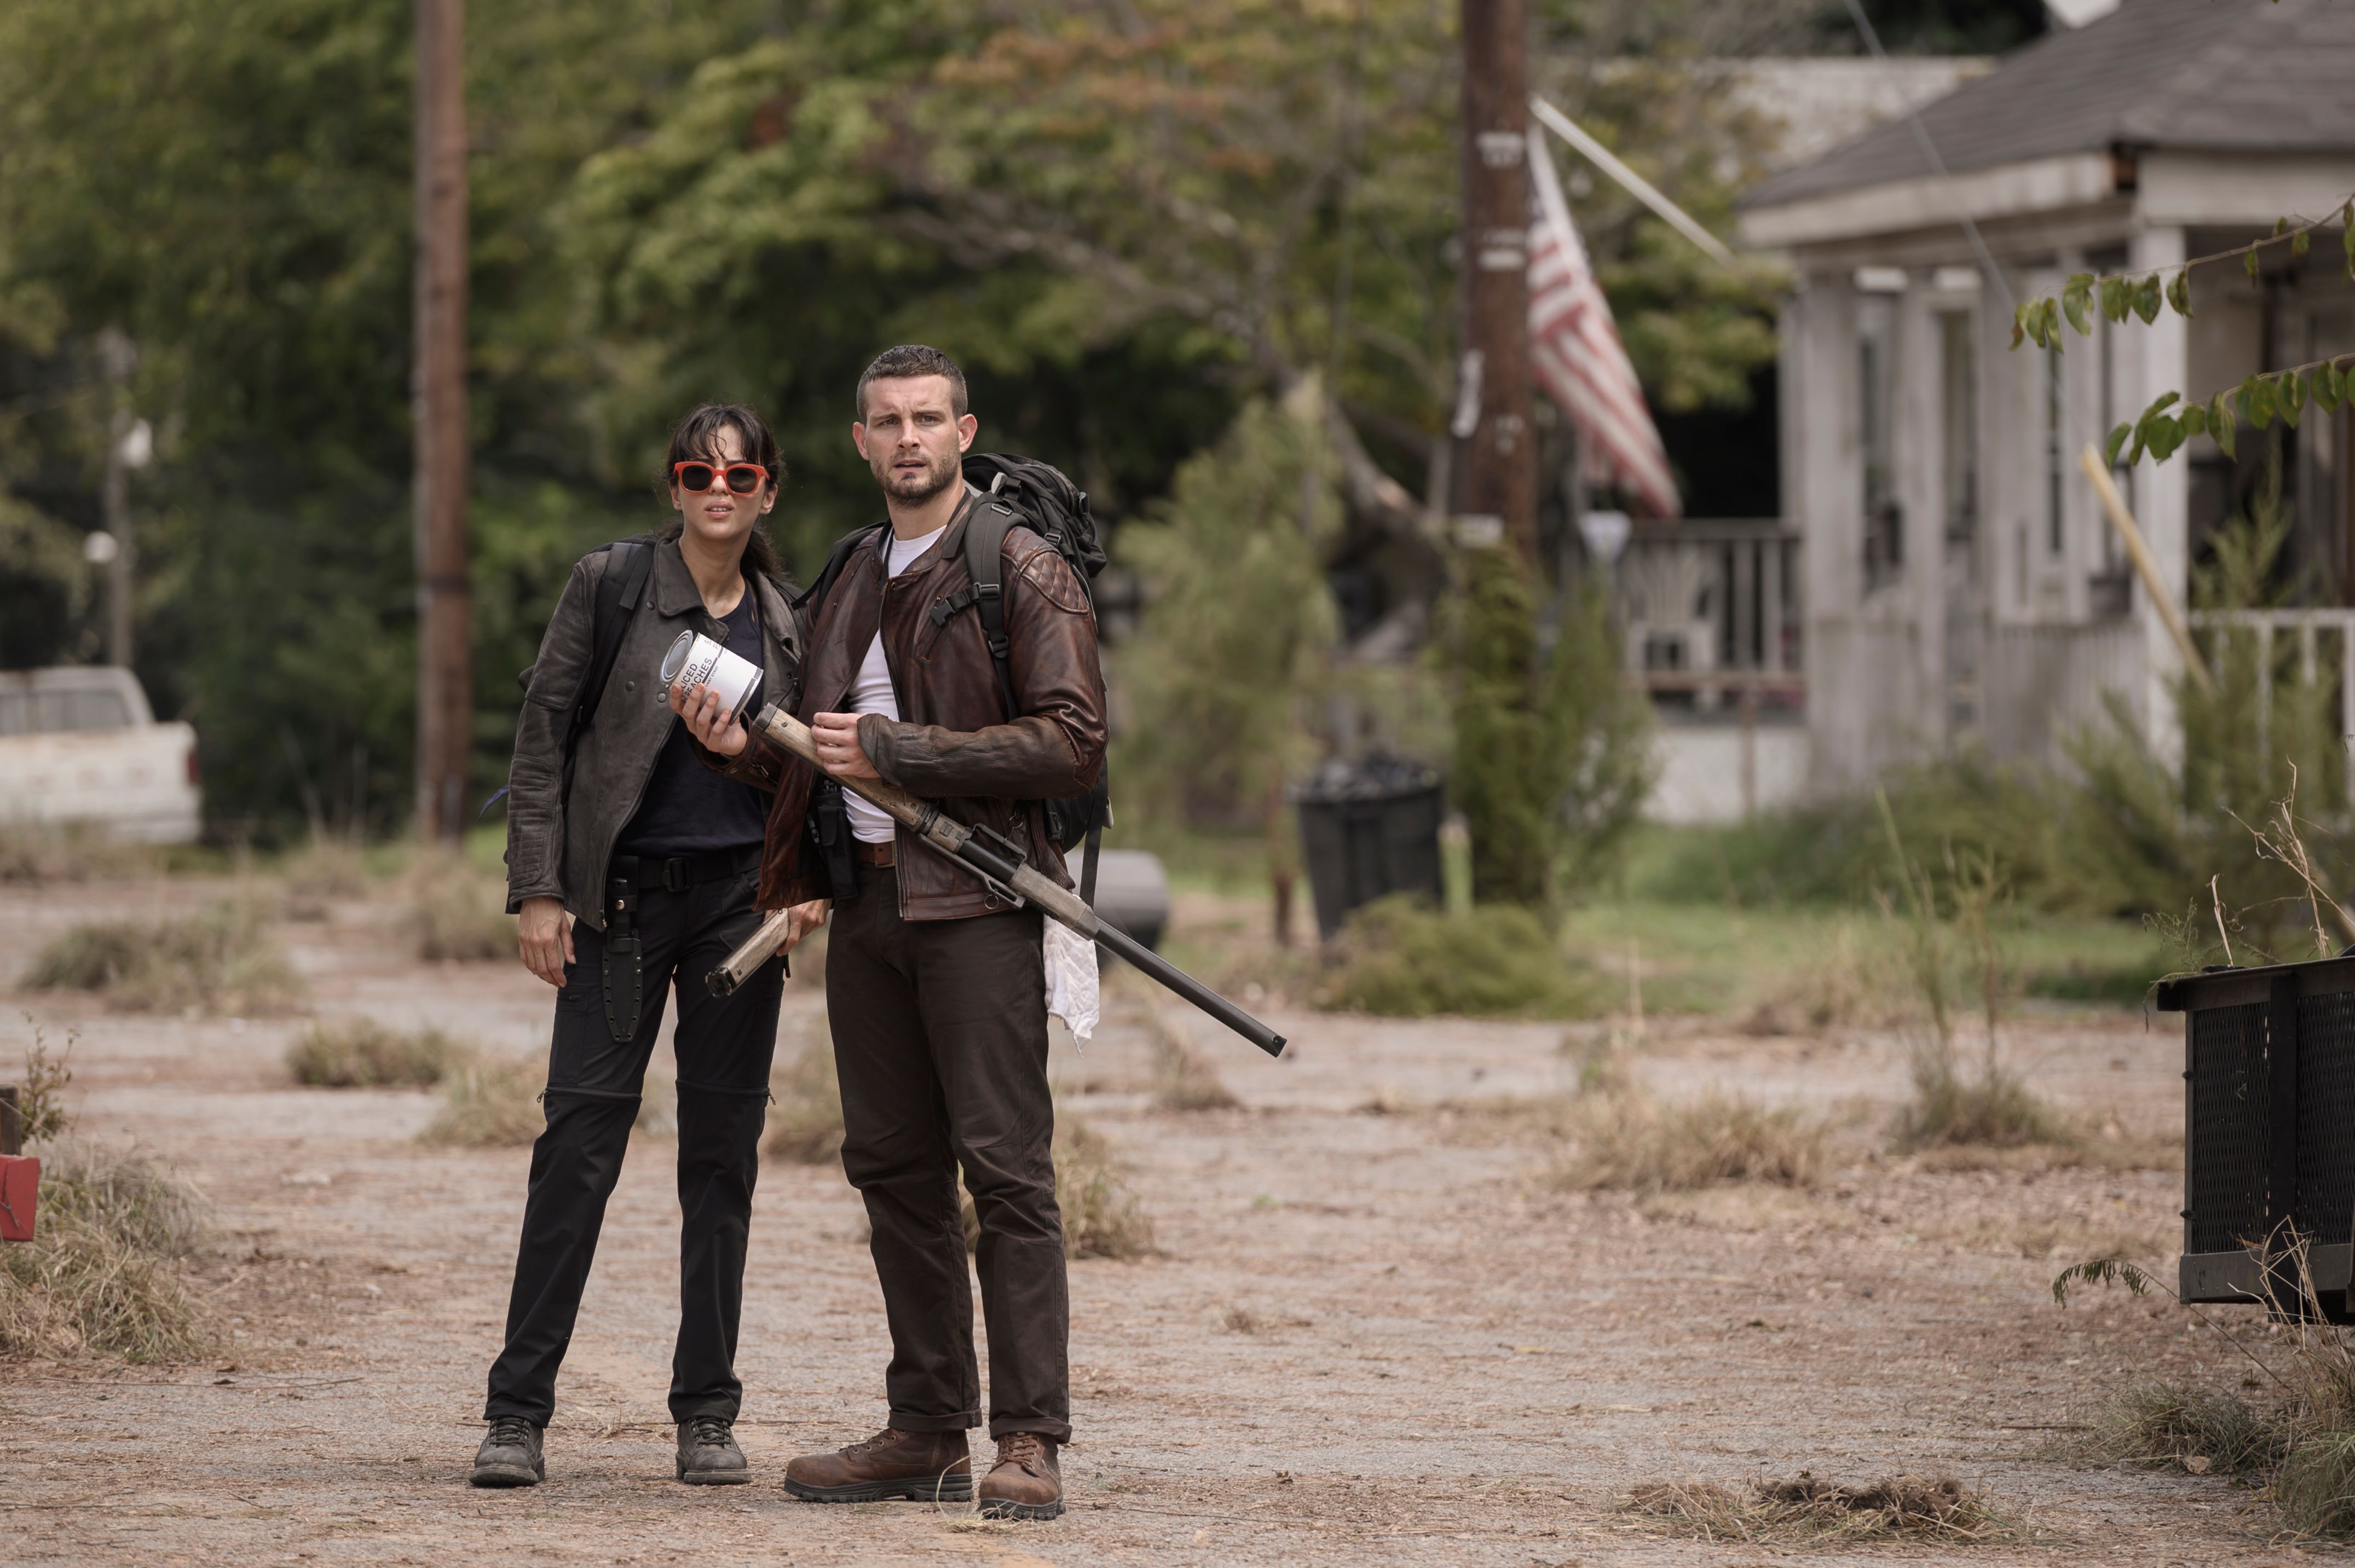 New Walking Dead Series Cast Revealed in New Images from AMC | Collider4302 x 2865